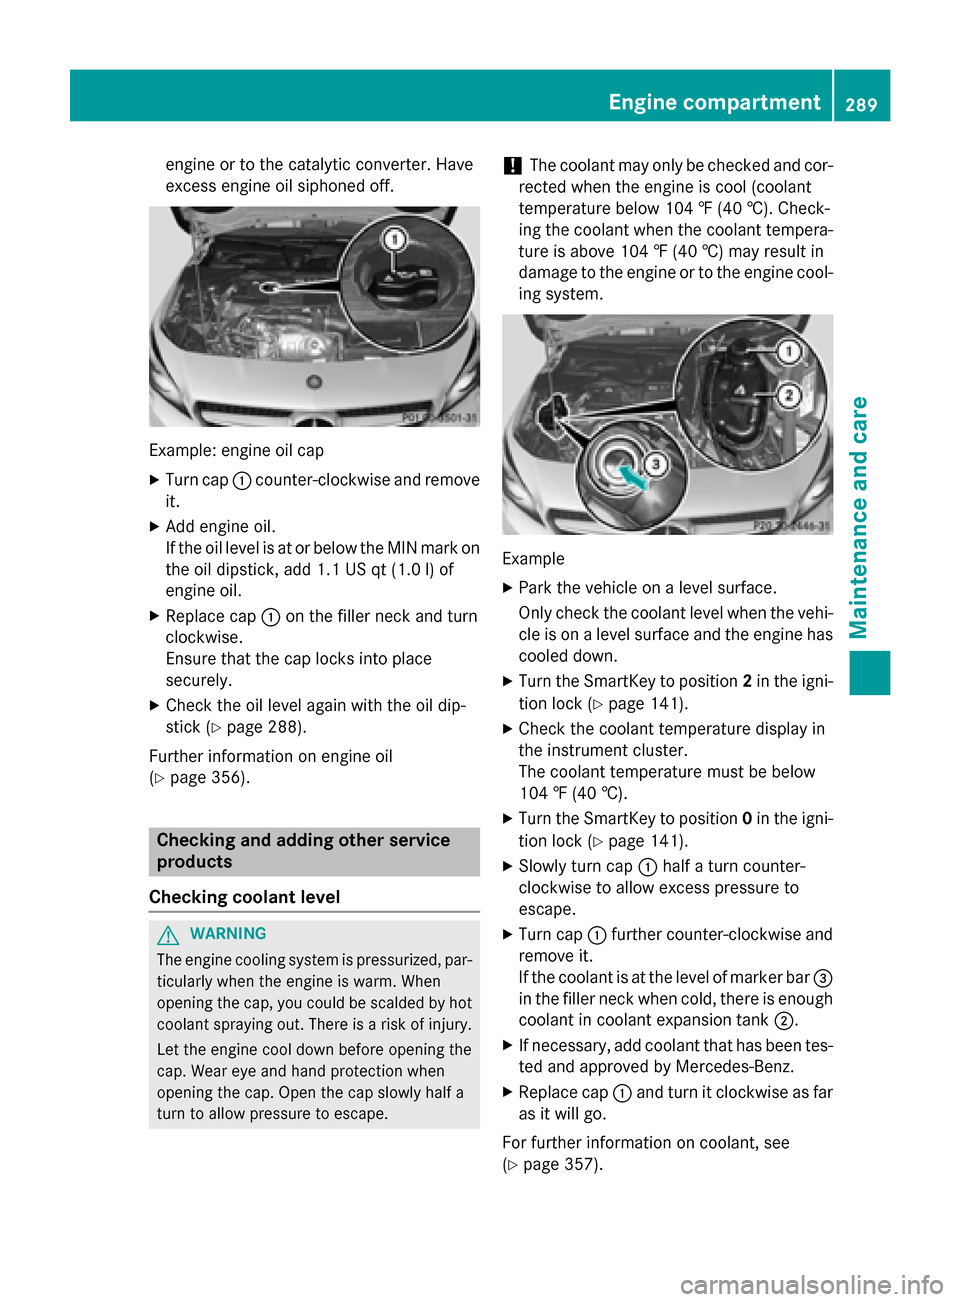 MERCEDES-BENZ CLA-Class 2015 C117 Owners Manual engine or to the catalytic converter. Have
excess engine oil siphoned off. Example: engine oil cap
X Turn cap :counter-clockwise and remove
it.
X Add engine oil.
If the oil level is at or below the MI